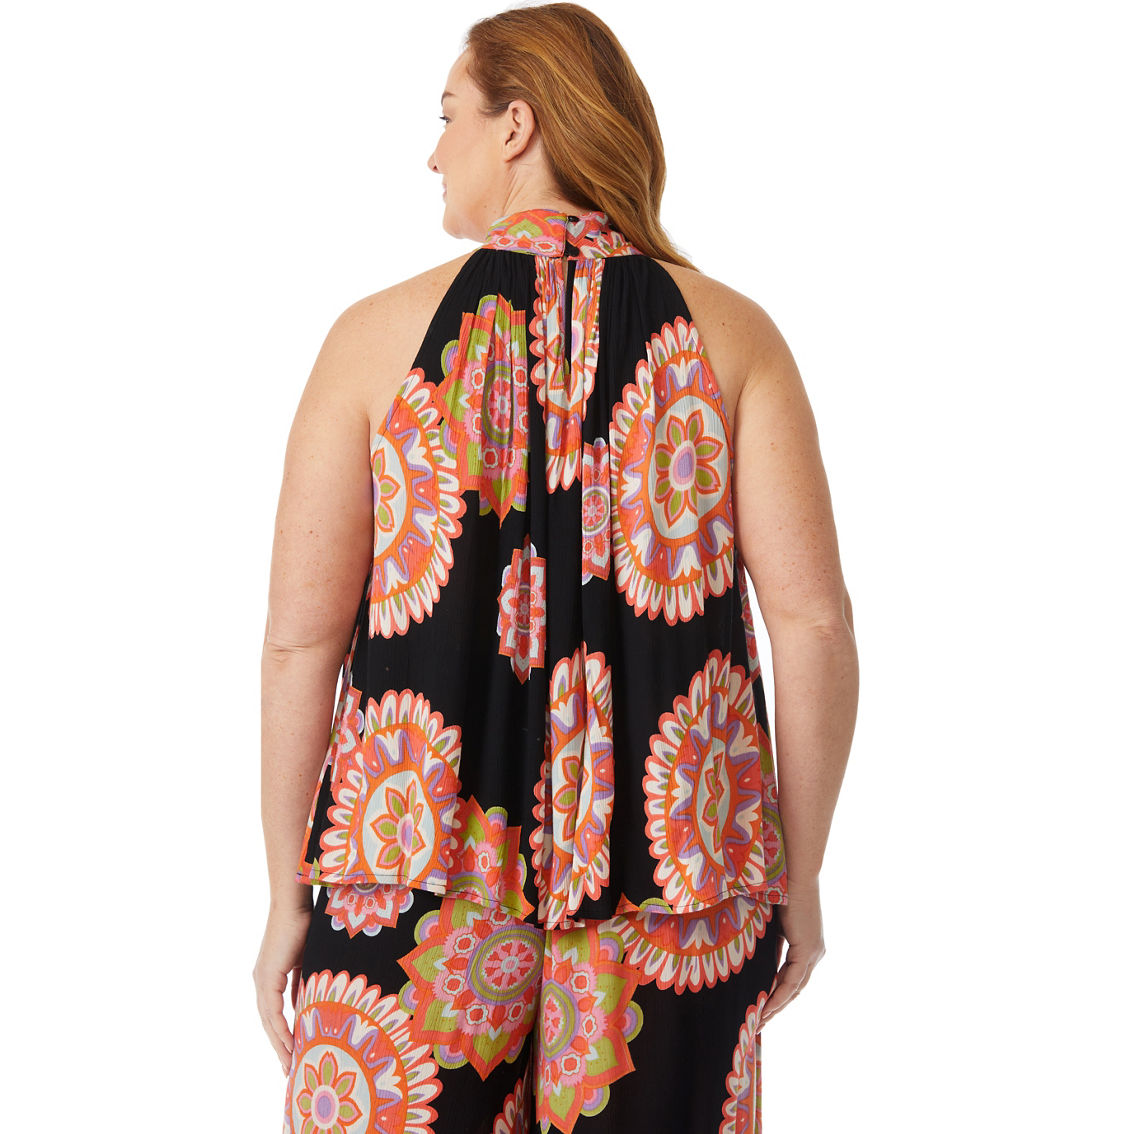 JW Plus Size Woven Print Swing Halter Top - Image 2 of 3